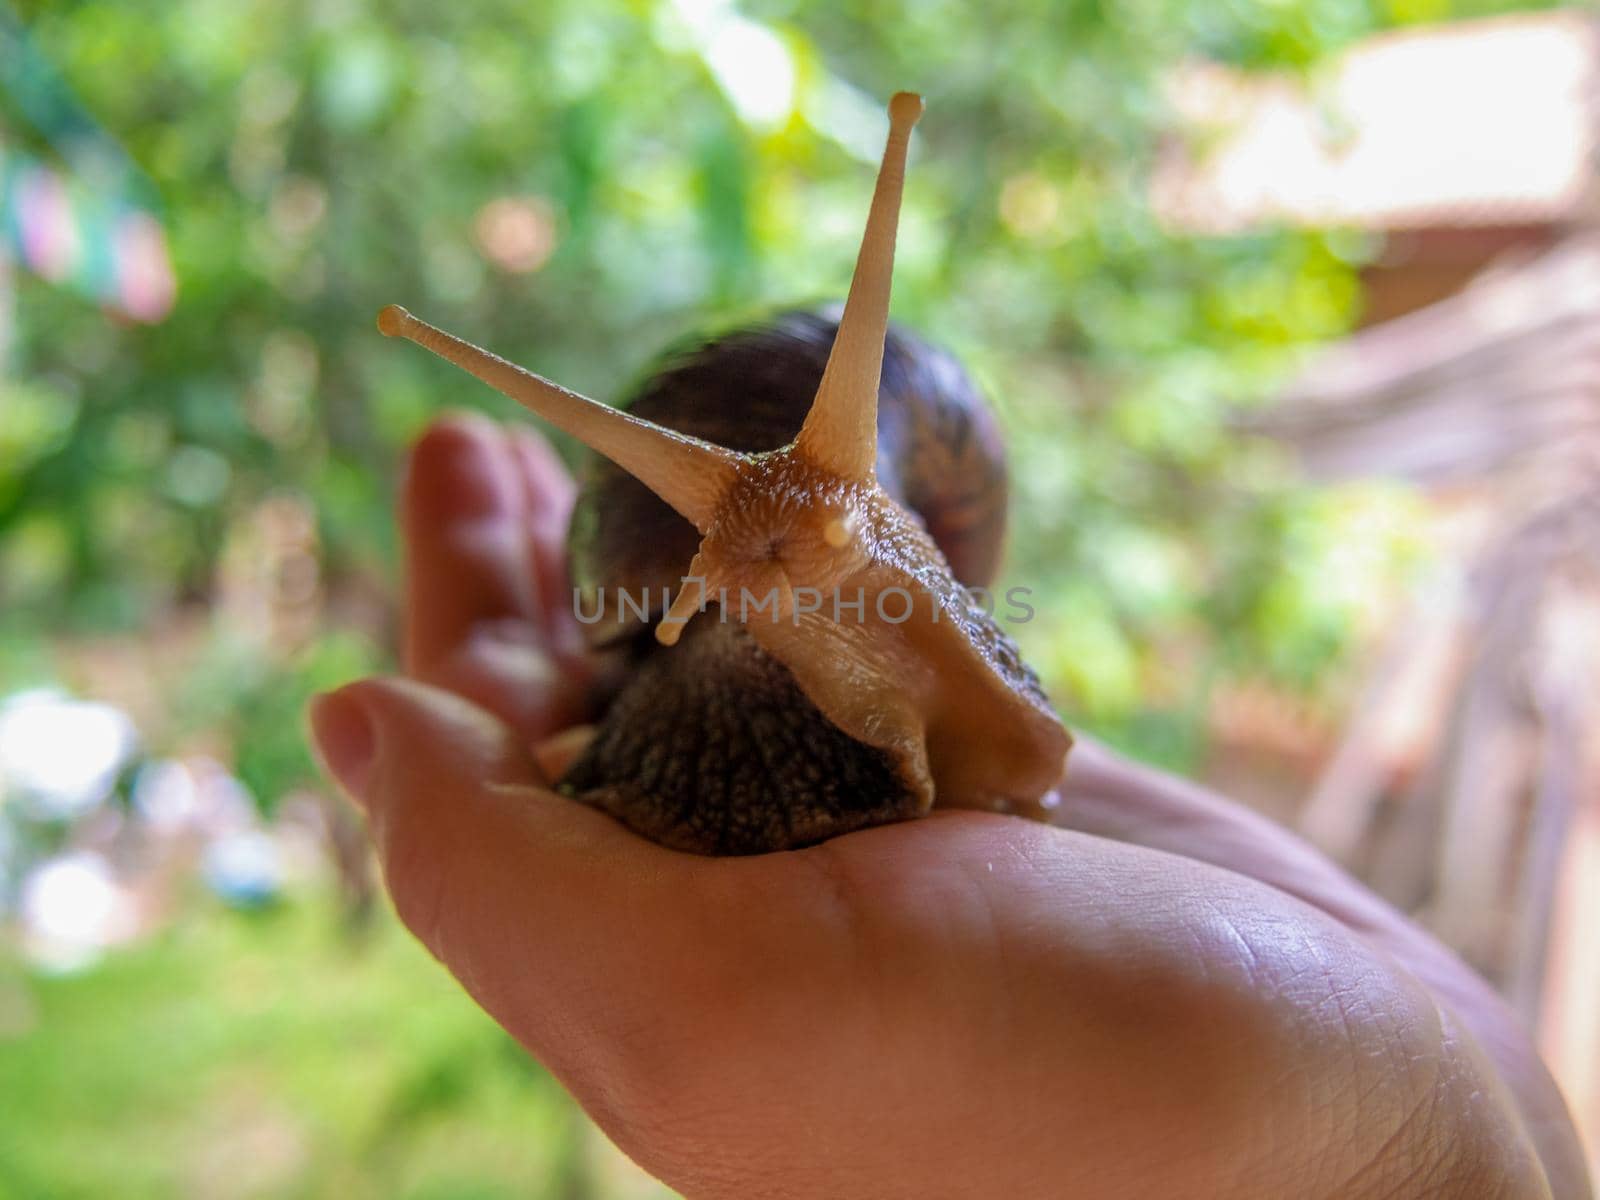 the big Achatina snail in a hand.